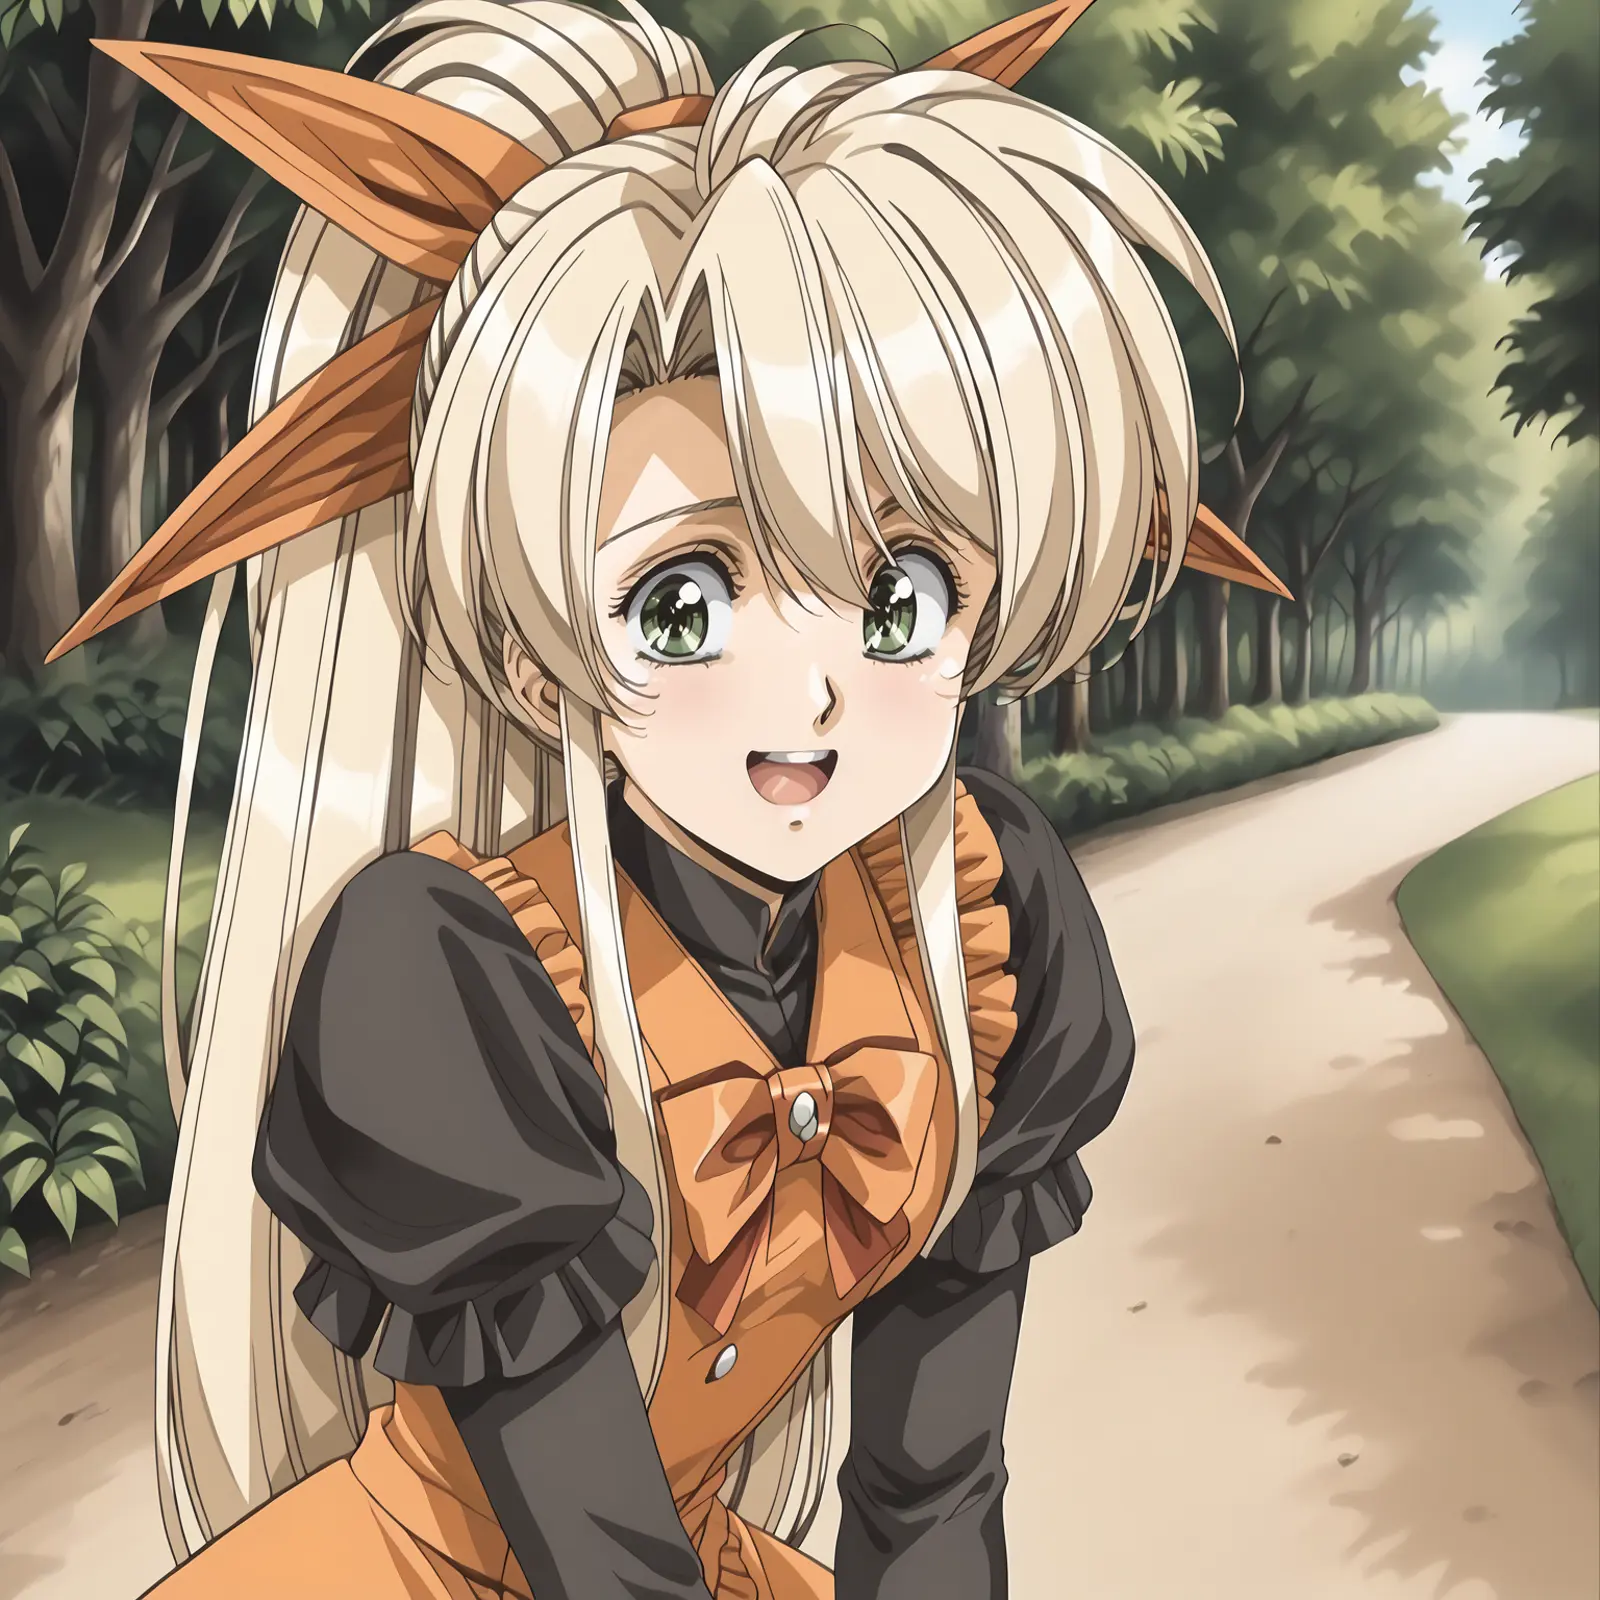 A young woman with light-colored hair styled in a ponytail smiling broadly at the viewer. She is wearing a frilly black and orange outfit. The setting is a pathway surrounded by greenery and trees. 